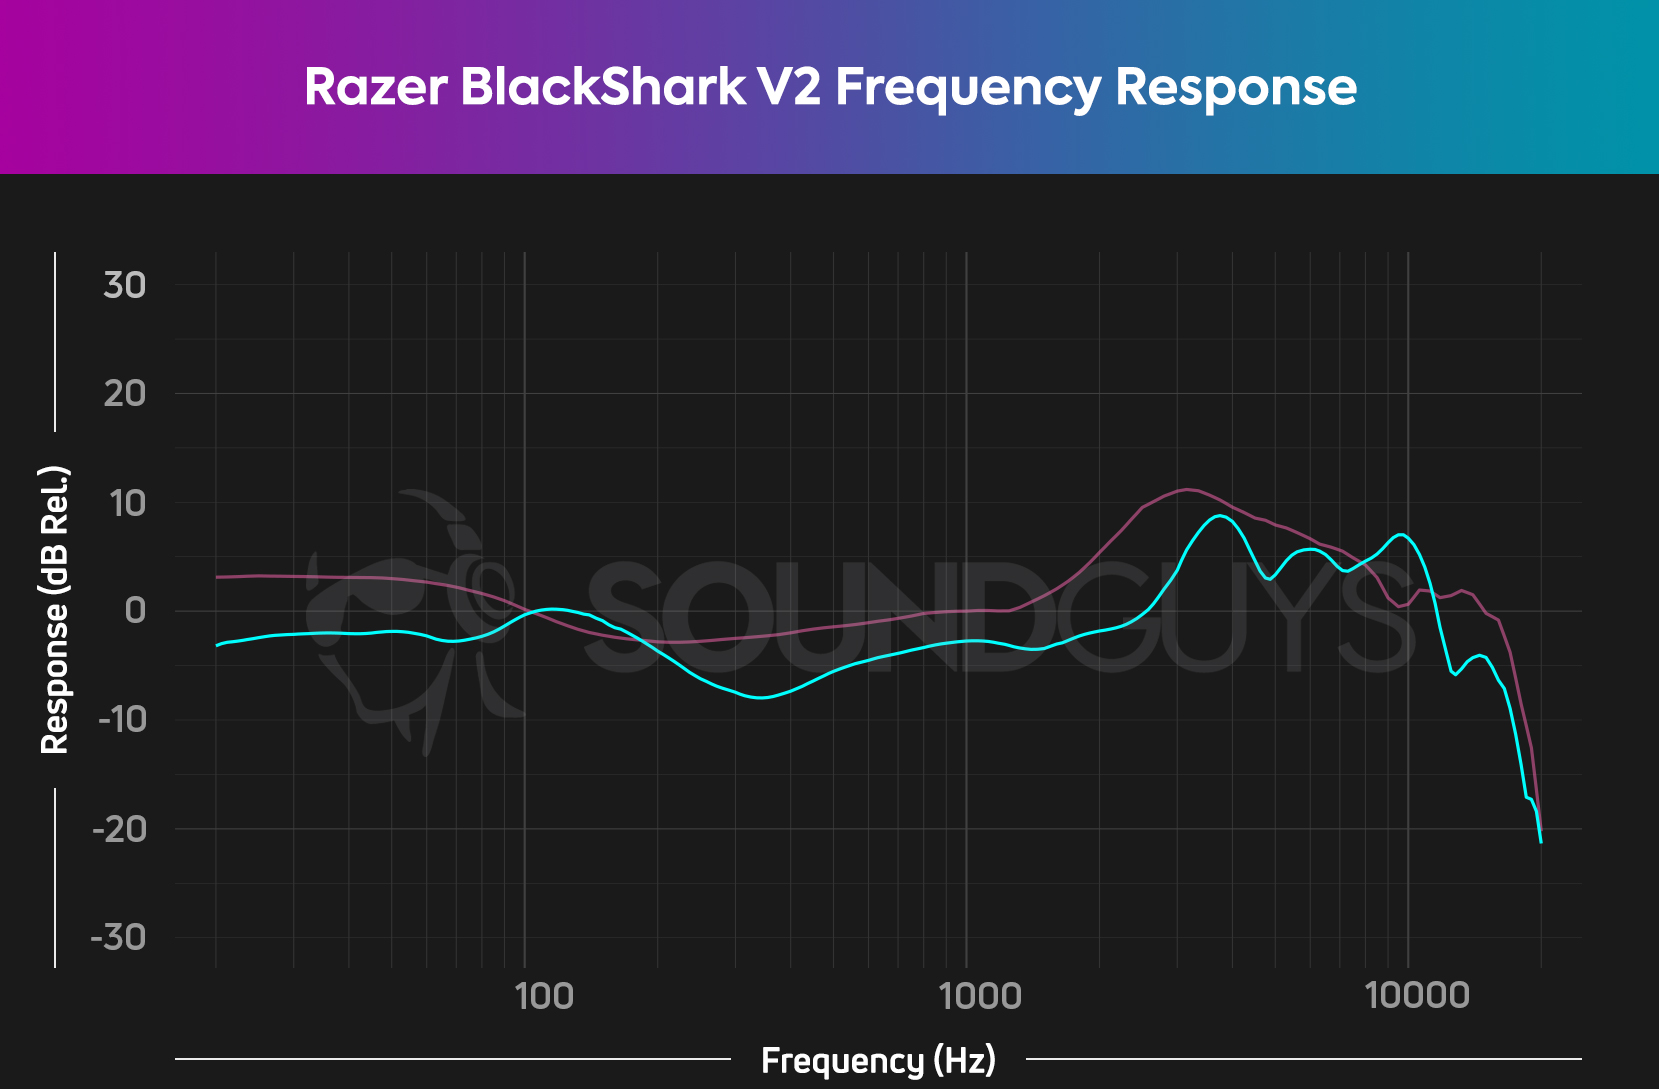 A frequency response chart for the Razer BlackShark V2 gaming headset, which shows fairly accurate audio across the frequency spectrum.